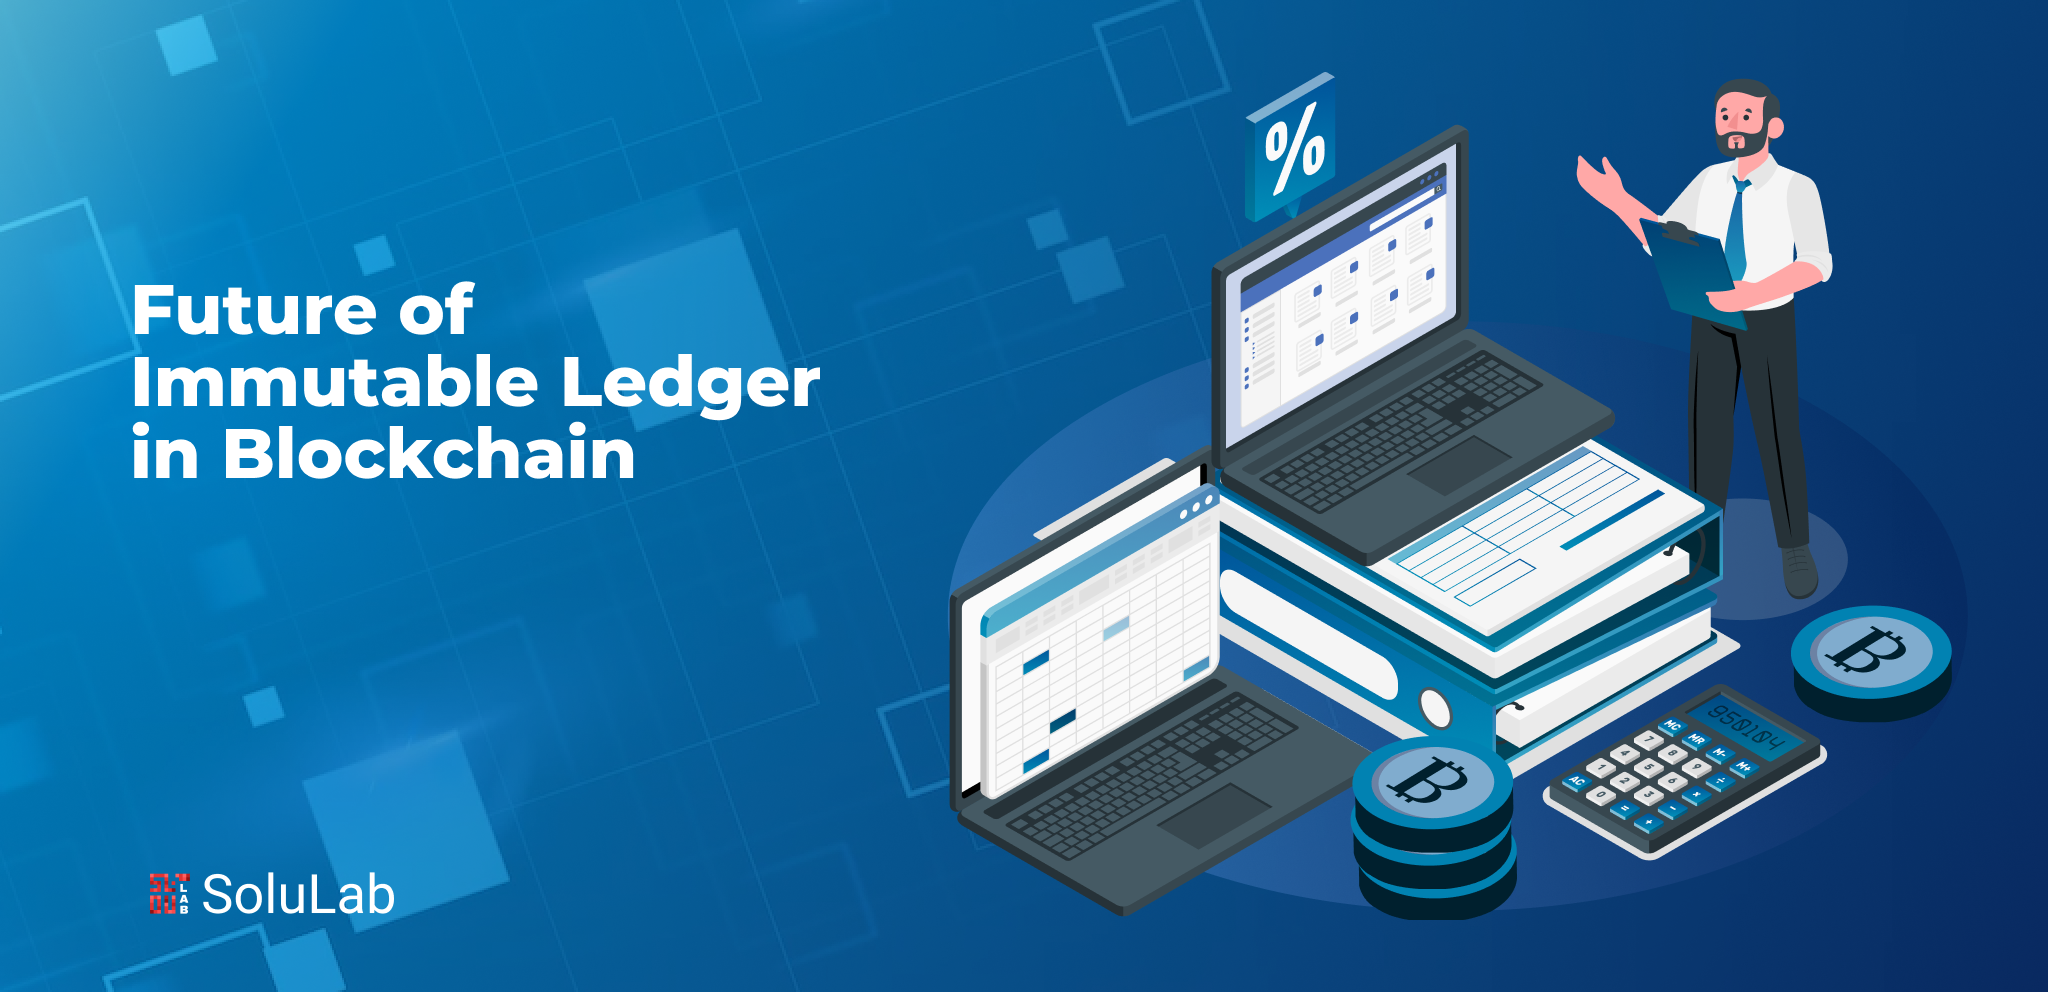 What is the Future of Immutable Ledger in Blockchain?